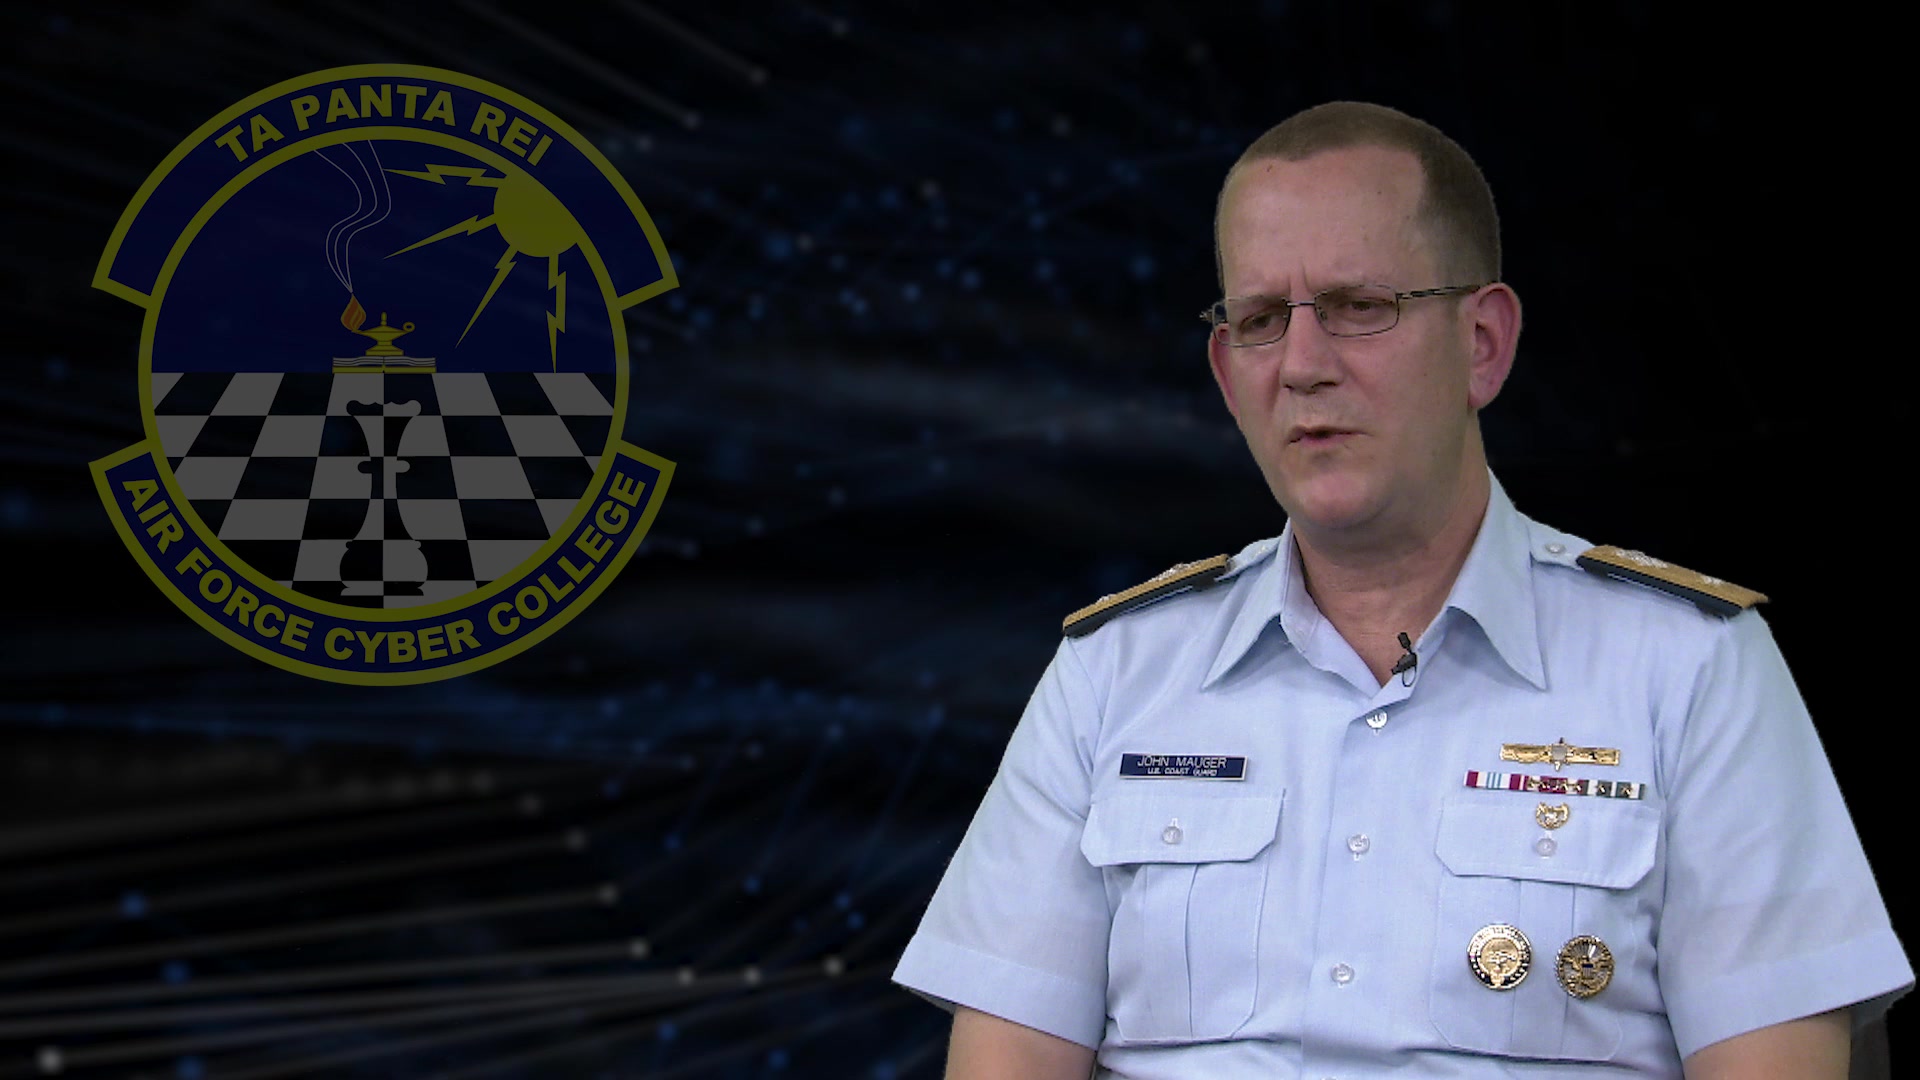 Video #4: One-on-one interview with RDML John Mauger, US CYBERCOM led by Col Kevin Beeker, Air Force Cyber College discussing cyber training and the role of professional military education. Video #4 of 5.